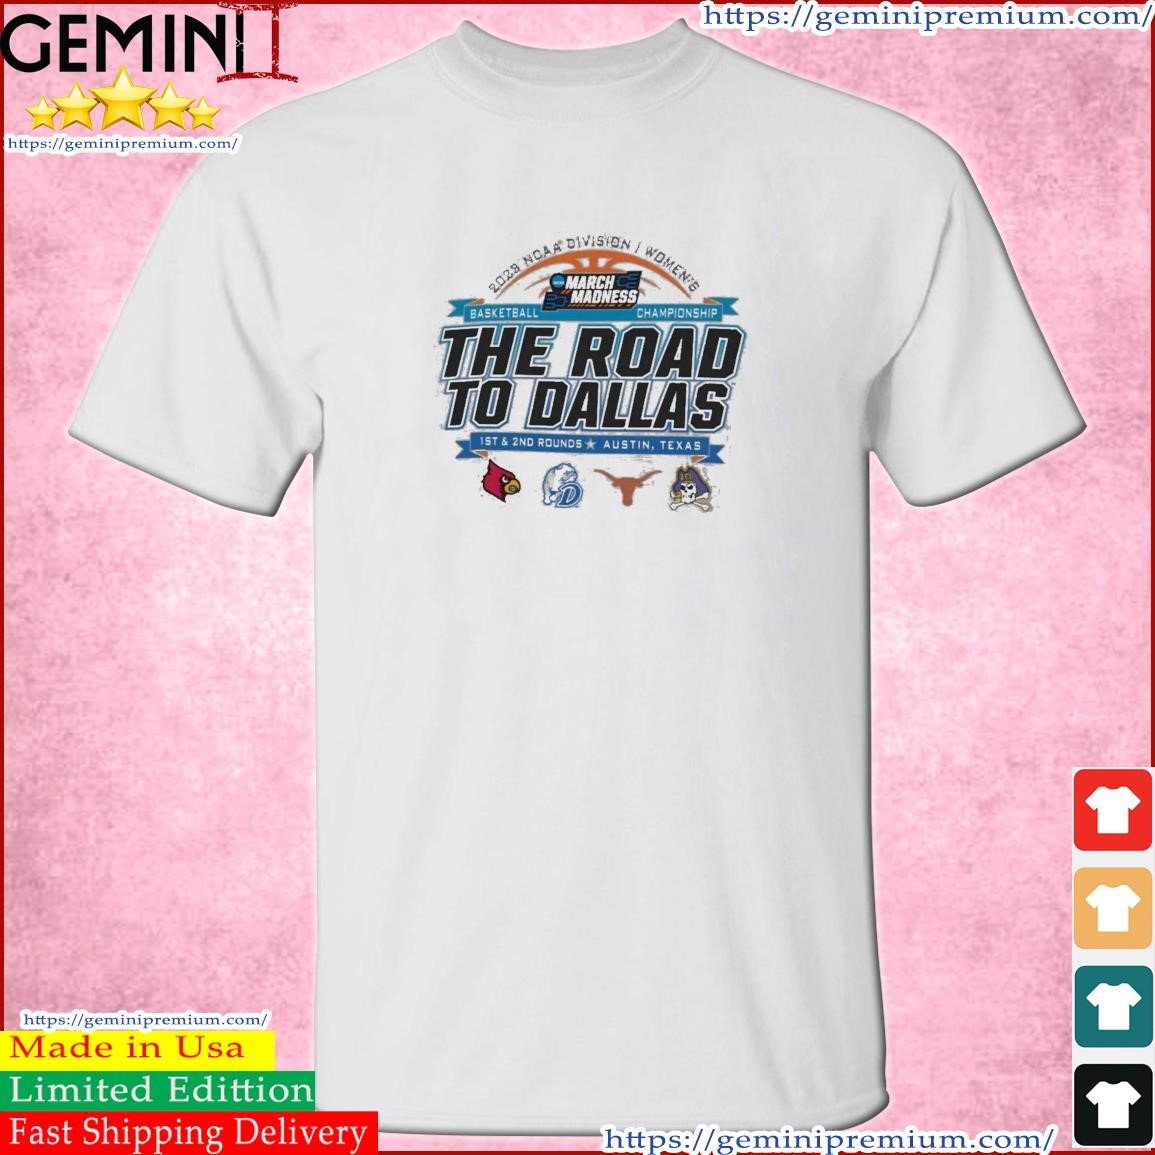 2023 NCAA Division I Women's Basketball The Road To Dallas March Madness 1st & 2nd Rounds Austin, TX Shirt